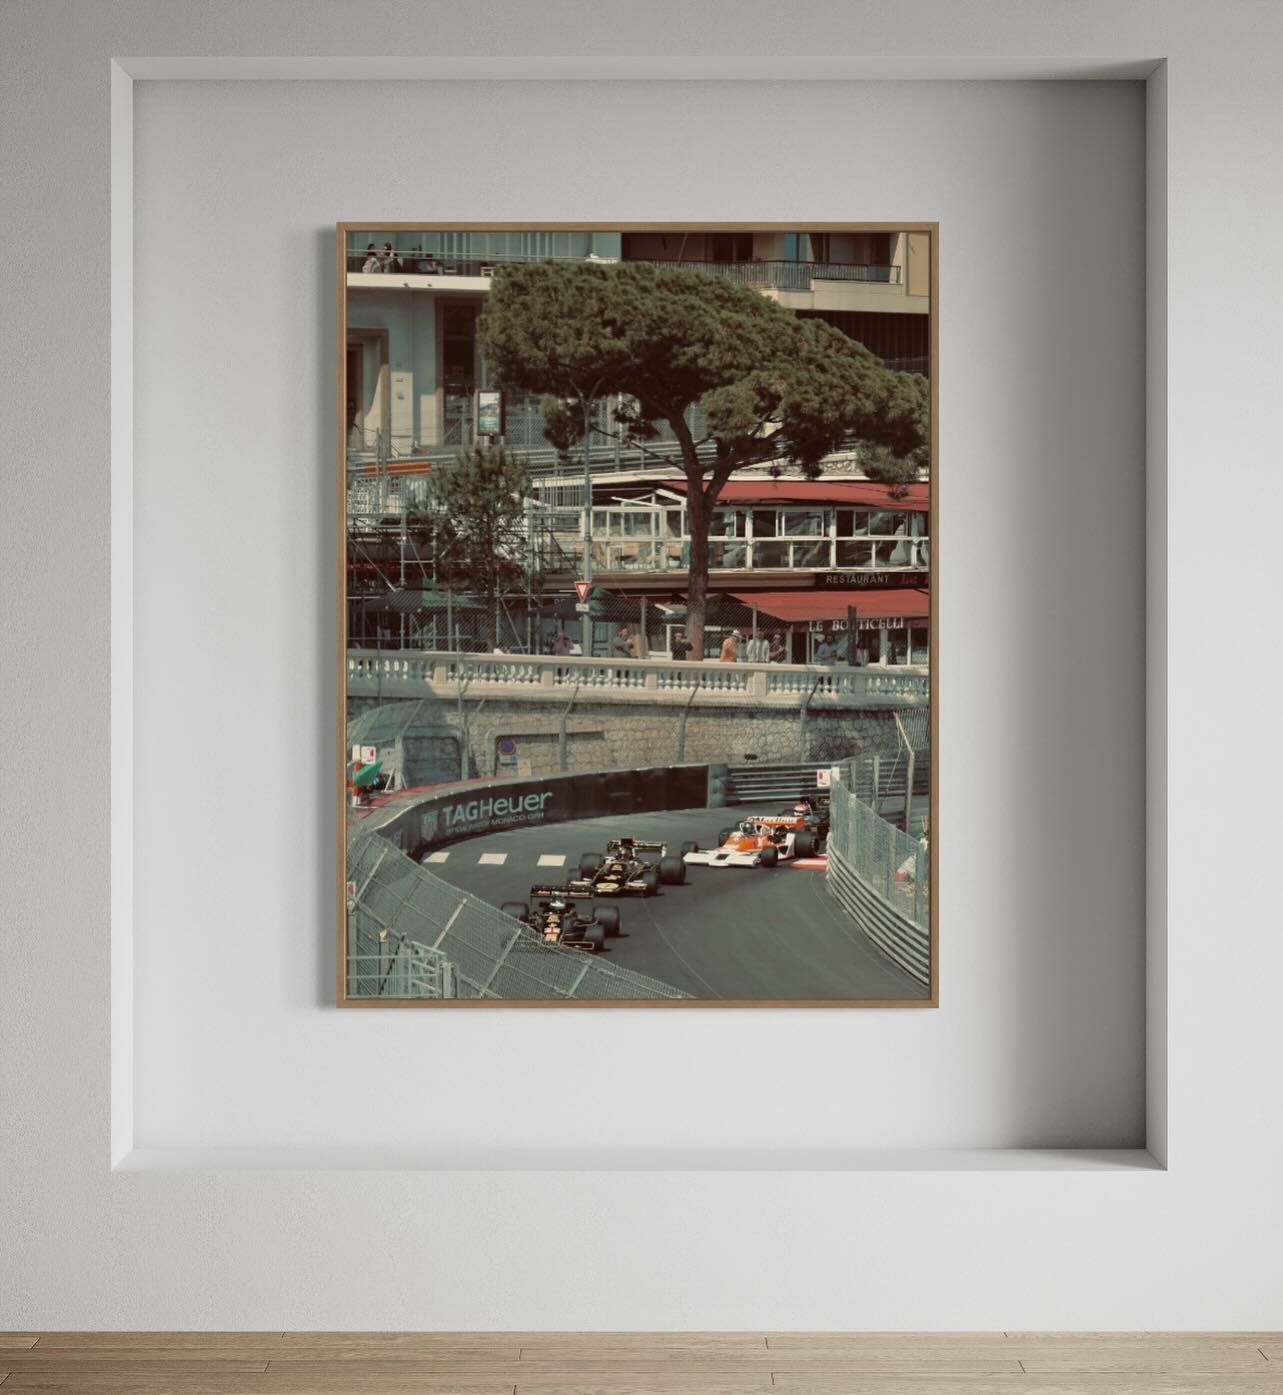 Tabac.

Now available in the usual sizes. Worldwide delivery is available. See website for more information.

#monaco #f1 #formula1 #racing #superyacht #luxury #luxurylifestyle #art #vintage #photography #car #tabac #montecarlo #casino #decor #home #